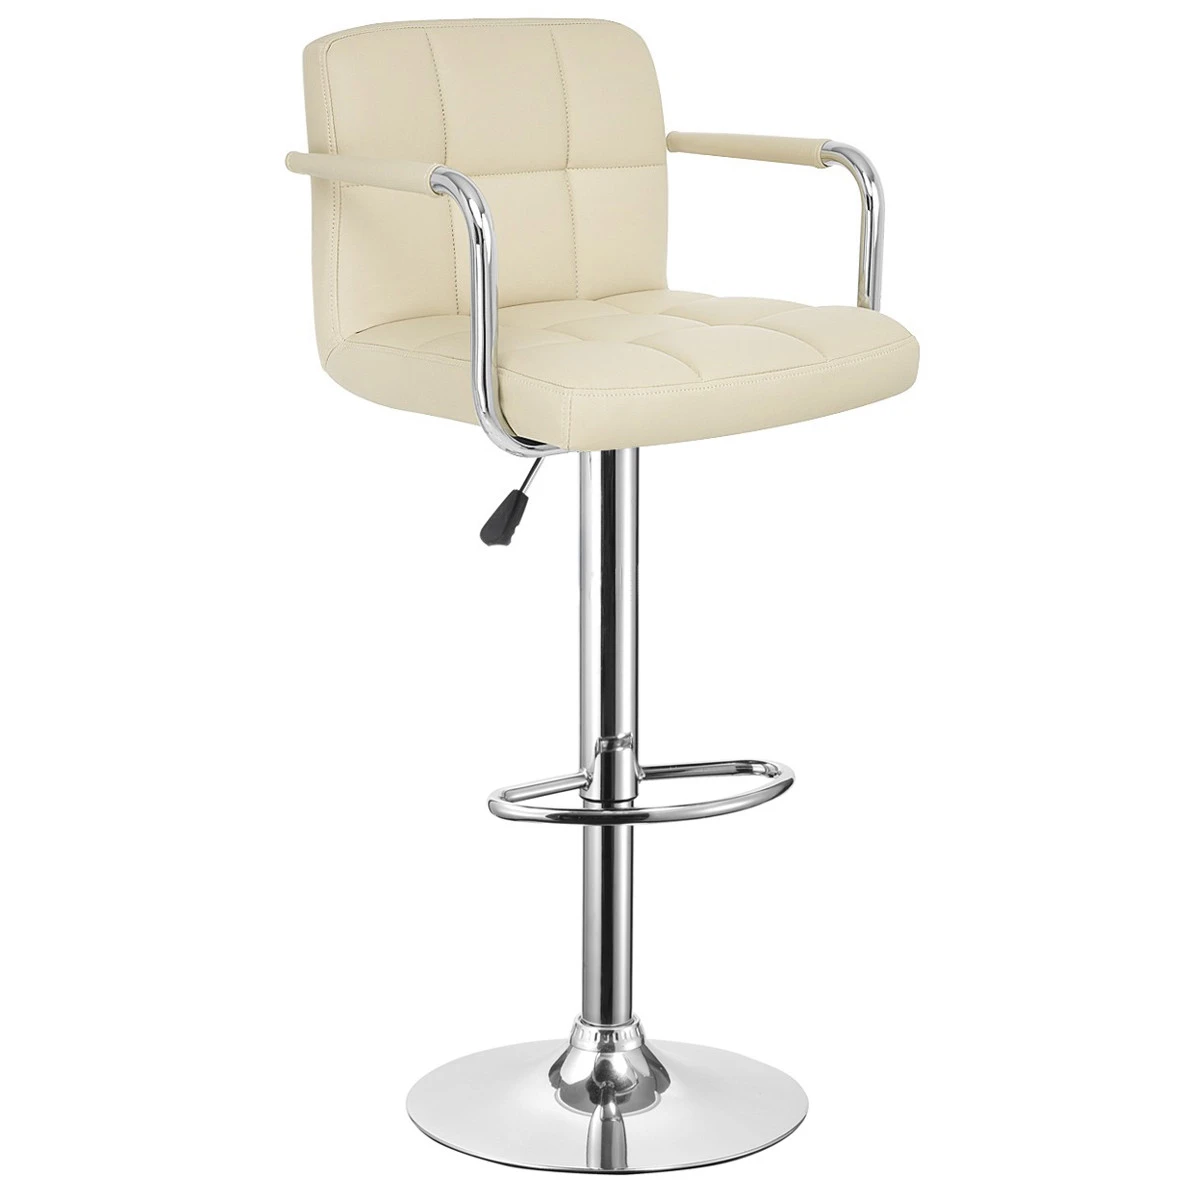 2021 New PU leather swivel commercial bar chair with armrest